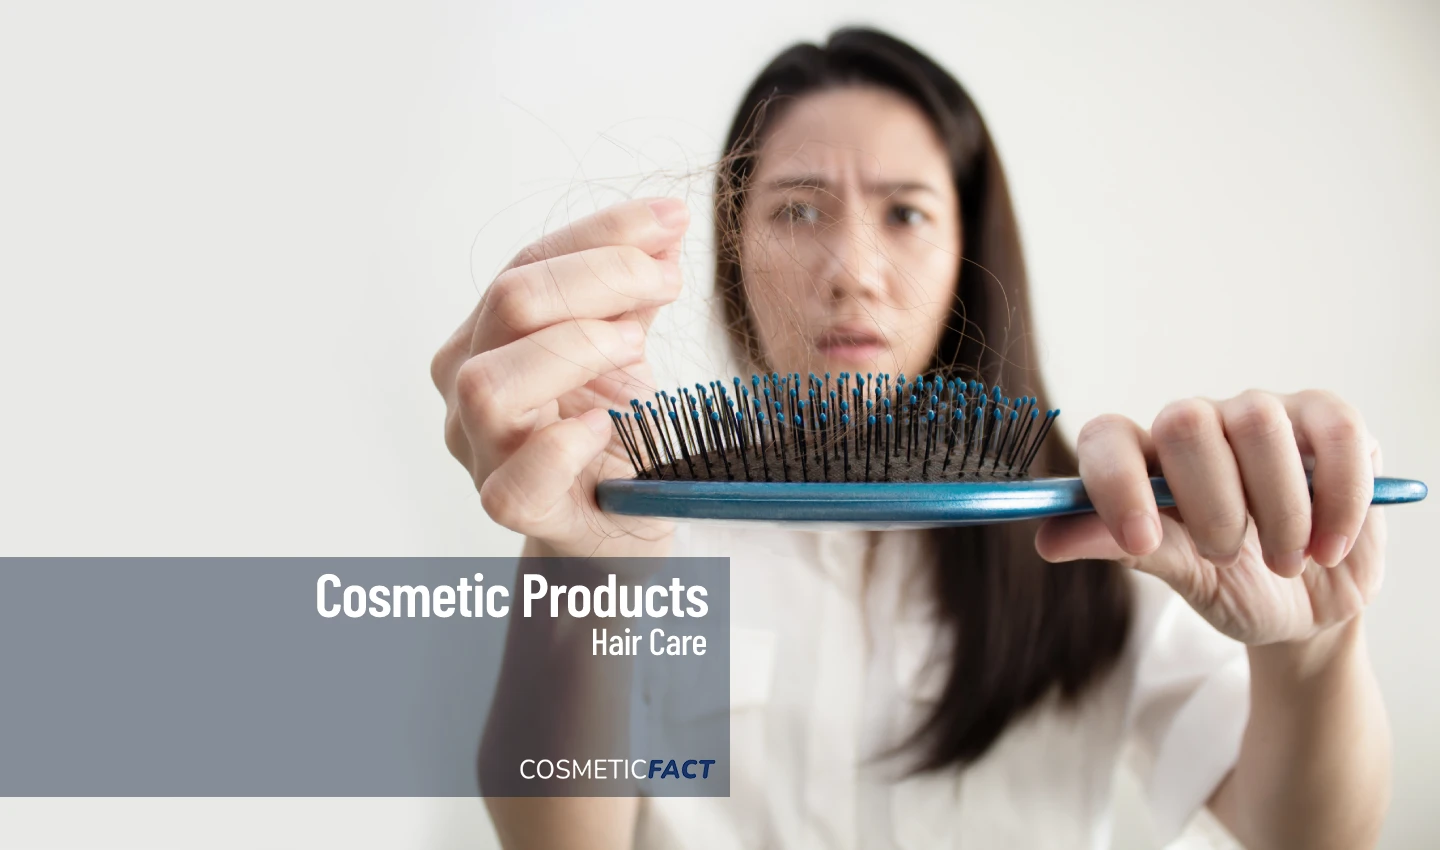 An anxious woman taking out loose strands of hair from a hairbrush, emphasizing the importance of restorative hair treatments for repairing and strengthening damaged hair.